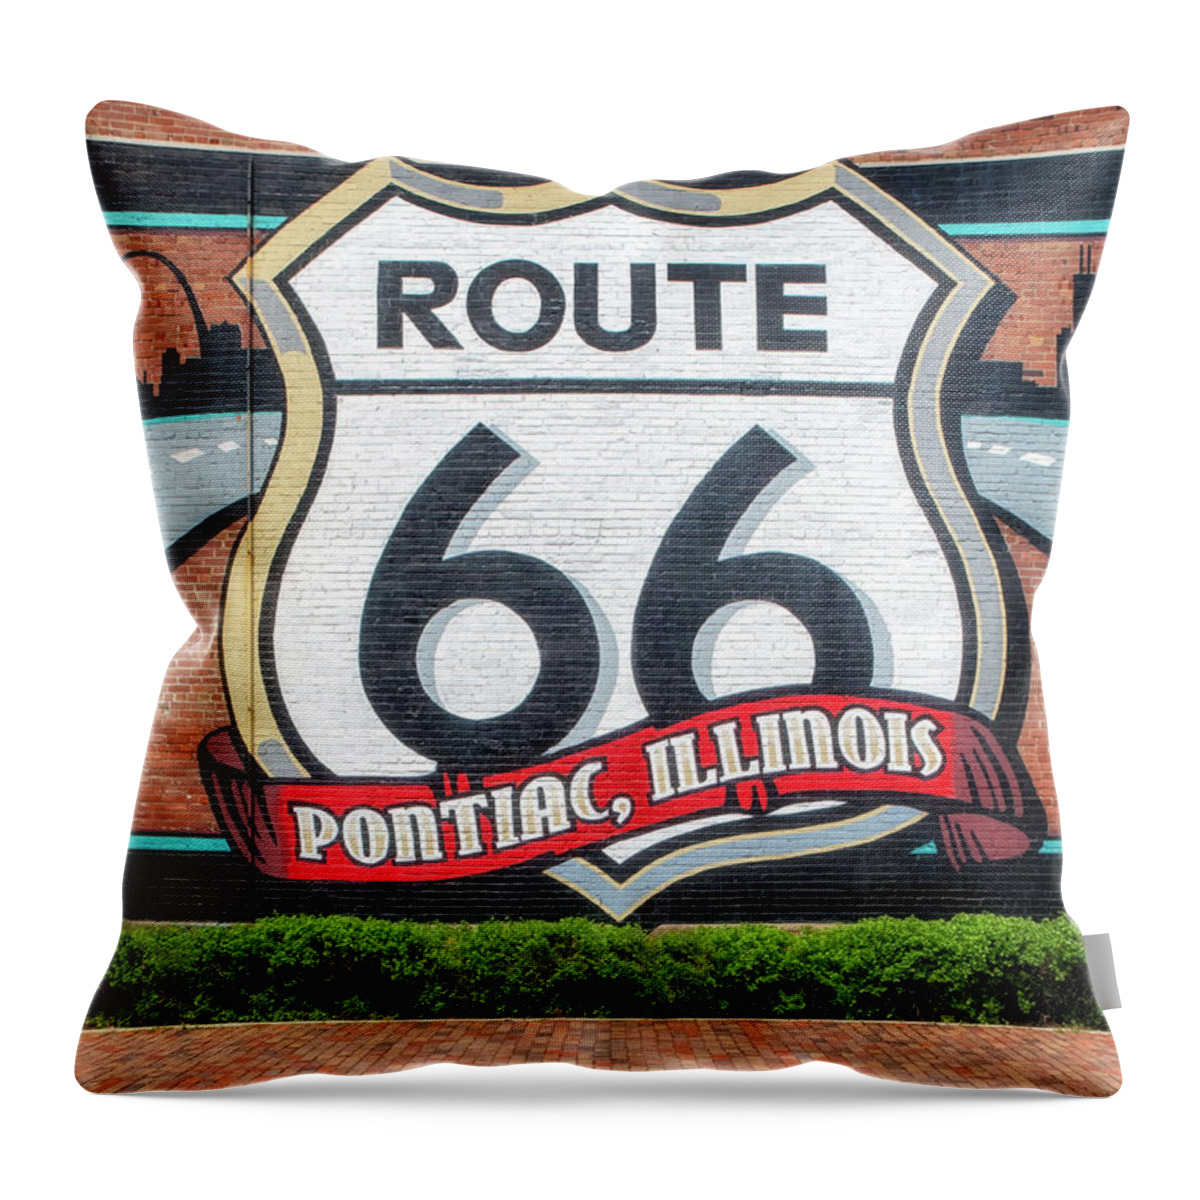 Pontiac Illinois Throw Pillow featuring the photograph Route 66 - Pontiac Illinois Mural by Susan Rissi Tregoning